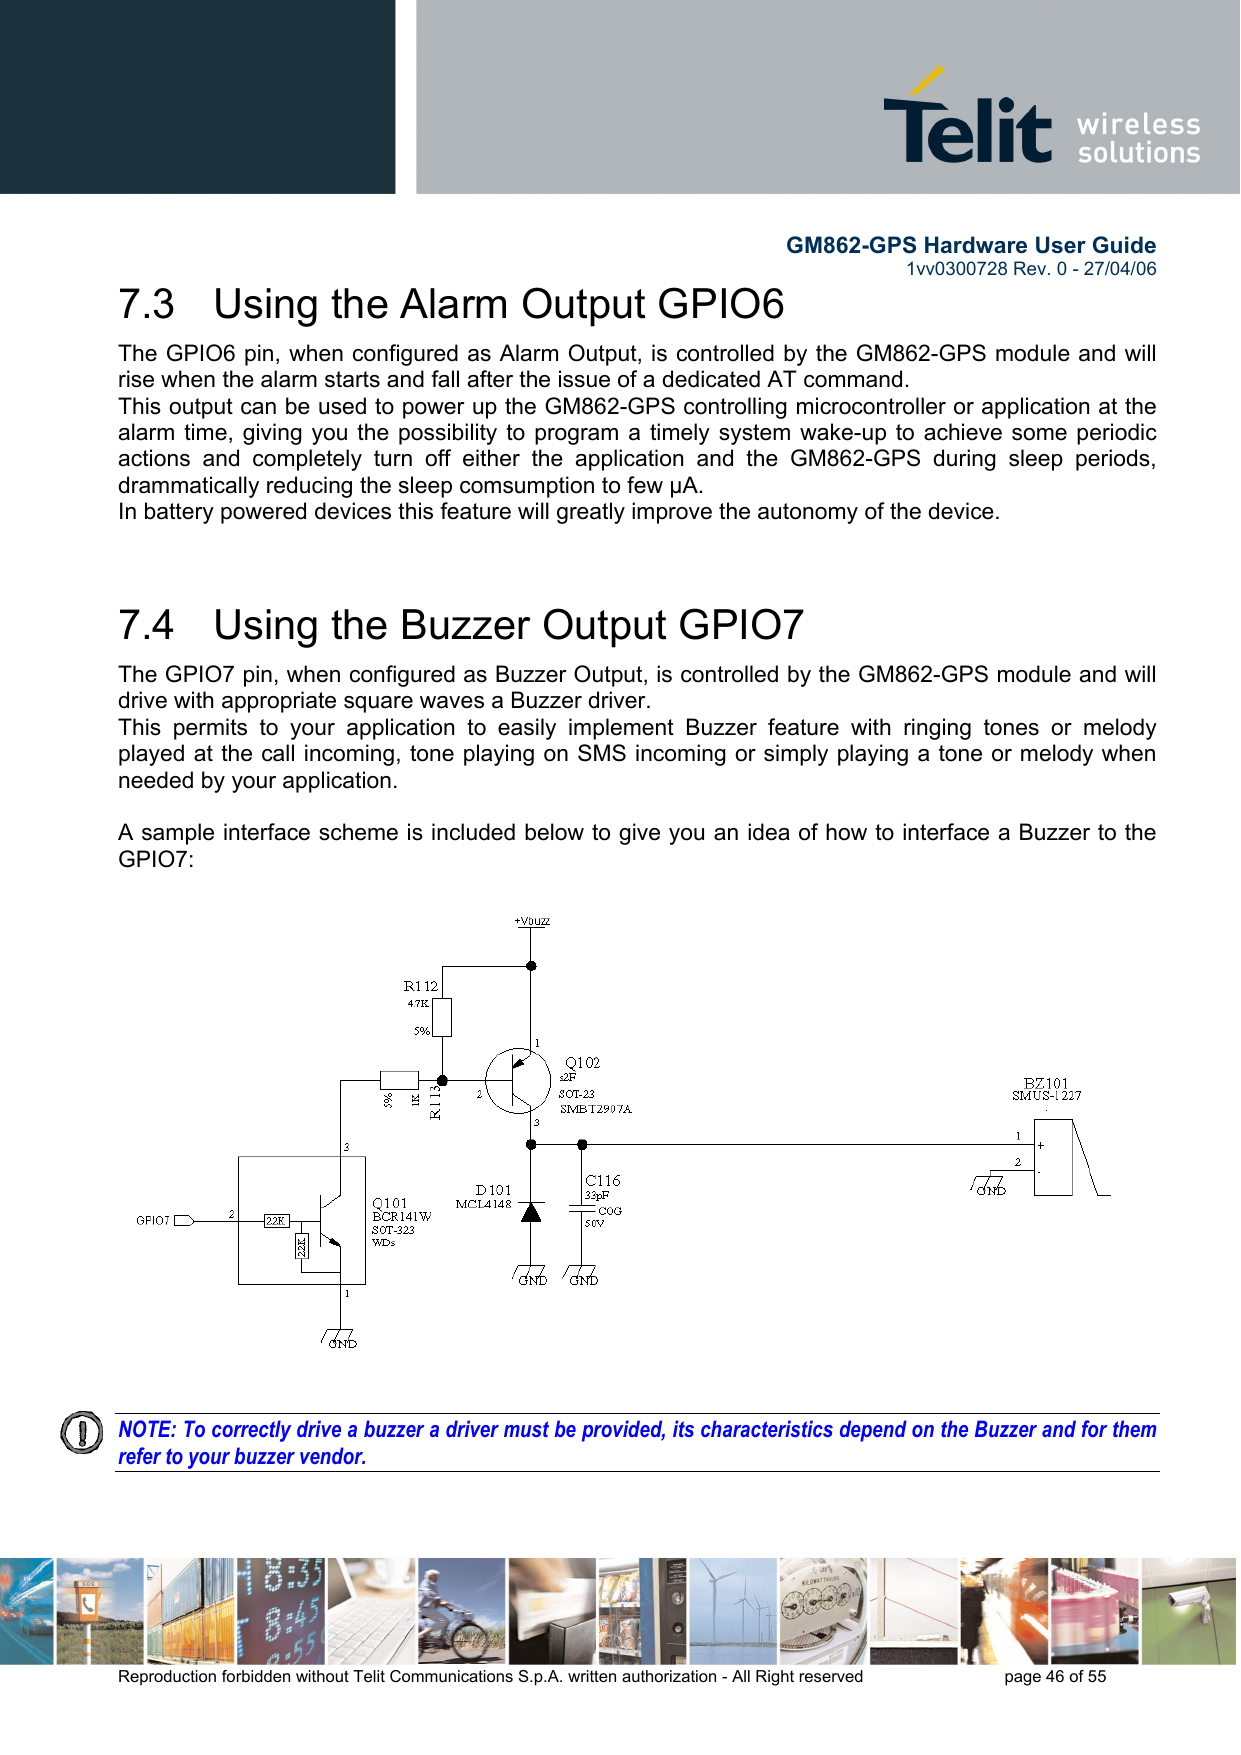        GM862-GPS Hardware User Guide   1vv0300728 Rev. 0 - 27/04/06    Reproduction forbidden without Telit Communications S.p.A. written authorization - All Right reserved    page 46 of 55  7.3   Using the Alarm Output GPIO6 The GPIO6 pin, when configured as Alarm Output, is controlled by the GM862-GPS module and will rise when the alarm starts and fall after the issue of a dedicated AT command. This output can be used to power up the GM862-GPS controlling microcontroller or application at the alarm time, giving you the possibility to program a timely system wake-up to achieve some periodic actions and completely turn off either the application and the GM862-GPS during sleep periods, drammatically reducing the sleep comsumption to few μA. In battery powered devices this feature will greatly improve the autonomy of the device.  7.4   Using the Buzzer Output GPIO7 The GPIO7 pin, when configured as Buzzer Output, is controlled by the GM862-GPS module and will drive with appropriate square waves a Buzzer driver. This permits to your application to easily implement Buzzer feature with ringing tones or melody played at the call incoming, tone playing on SMS incoming or simply playing a tone or melody when needed by your application.  A sample interface scheme is included below to give you an idea of how to interface a Buzzer to the GPIO7:    NOTE: To correctly drive a buzzer a driver must be provided, its characteristics depend on the Buzzer and for them refer to your buzzer vendor.   